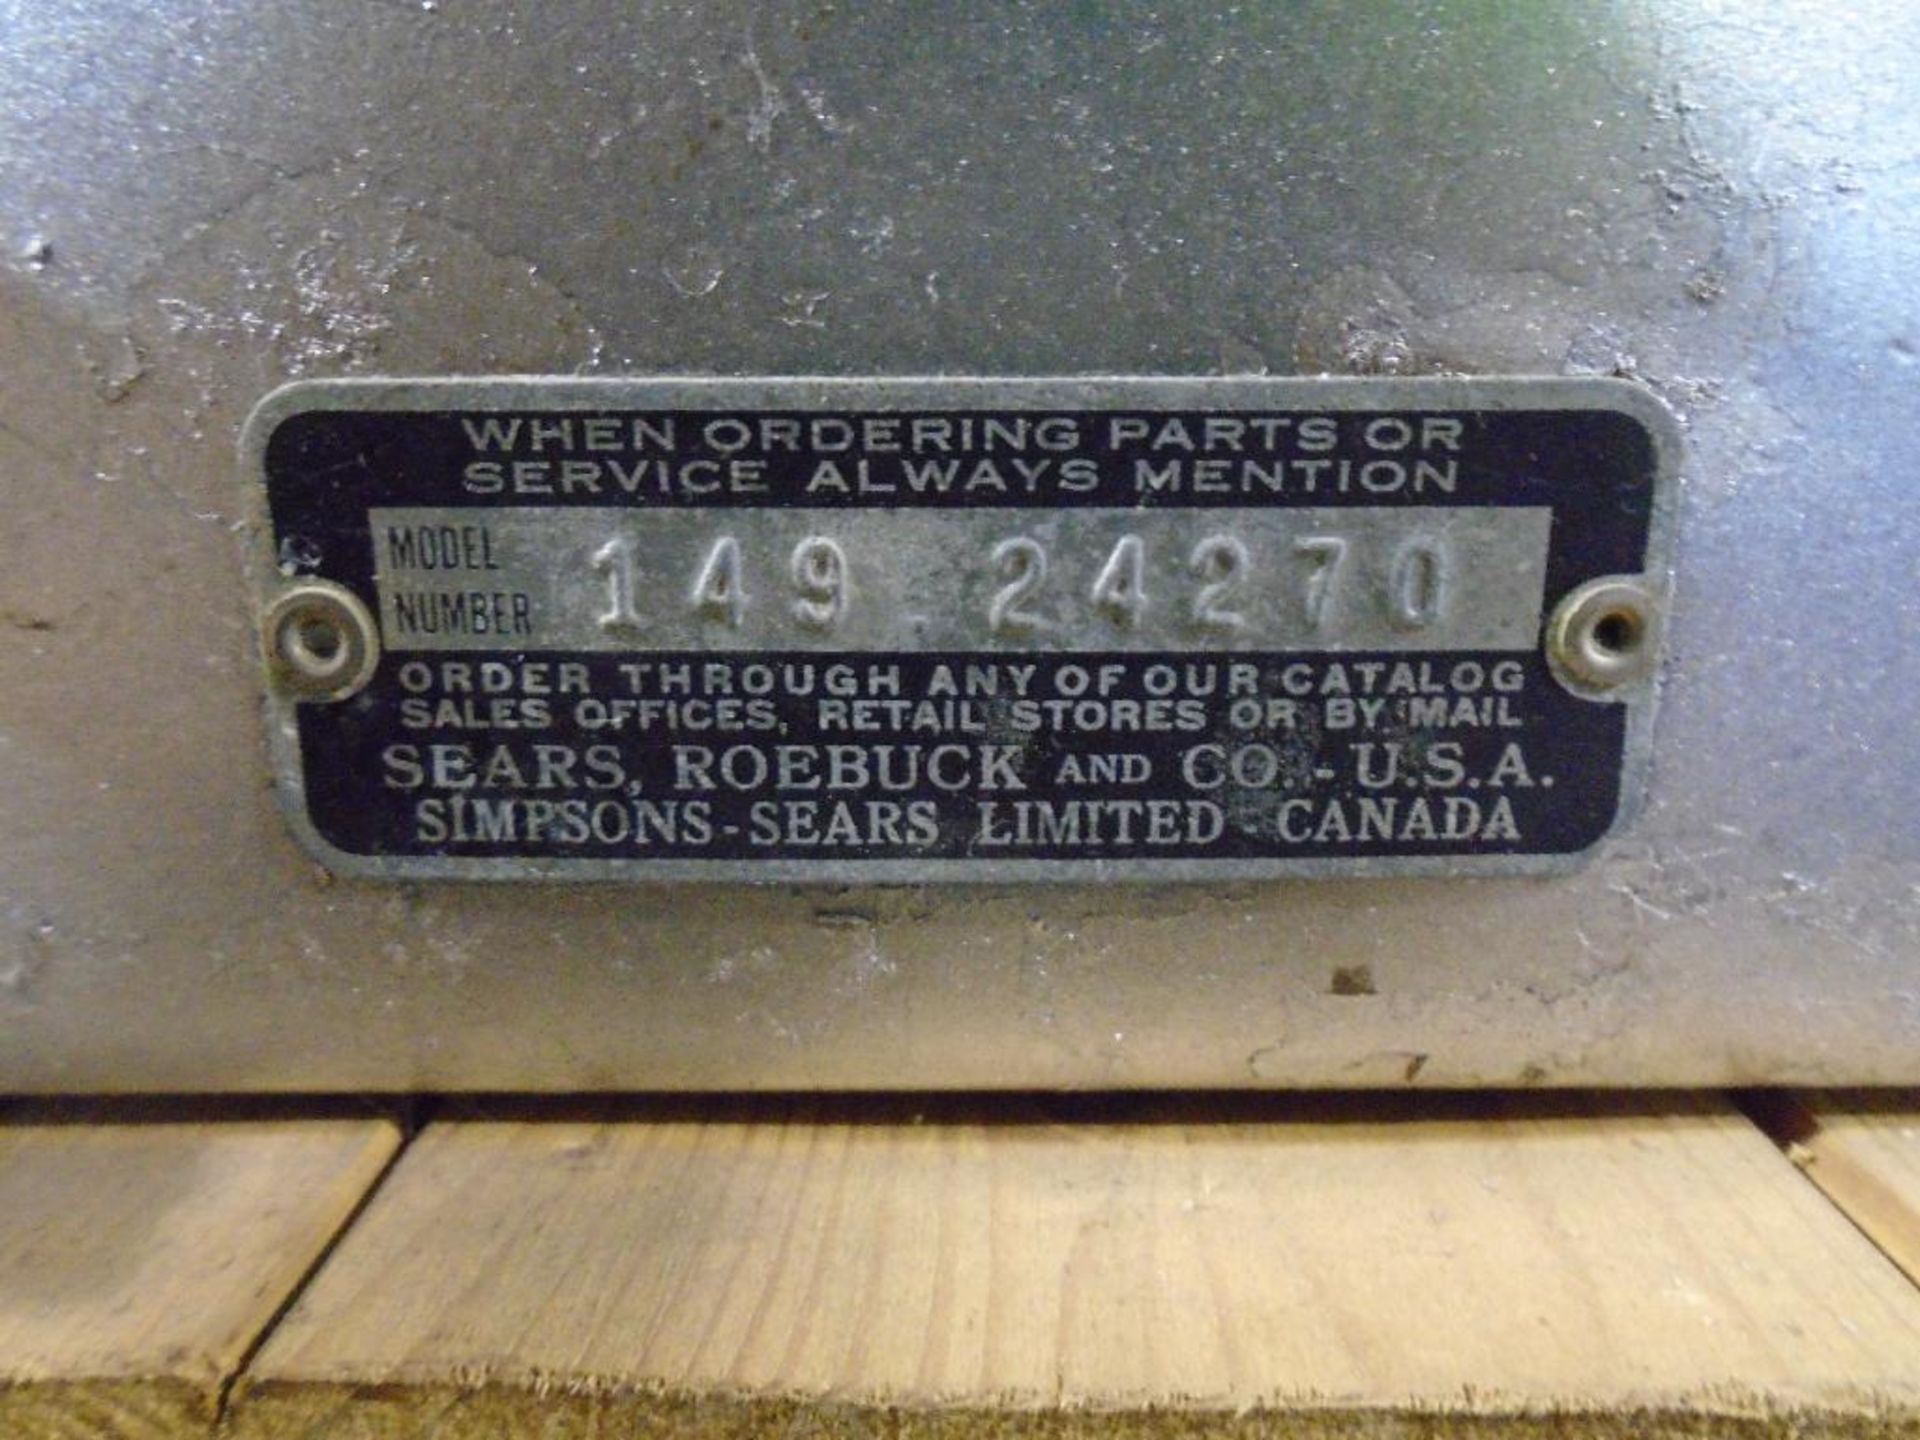 Sears Craftsman Tablesaw Model:149 24270 - Image 2 of 5